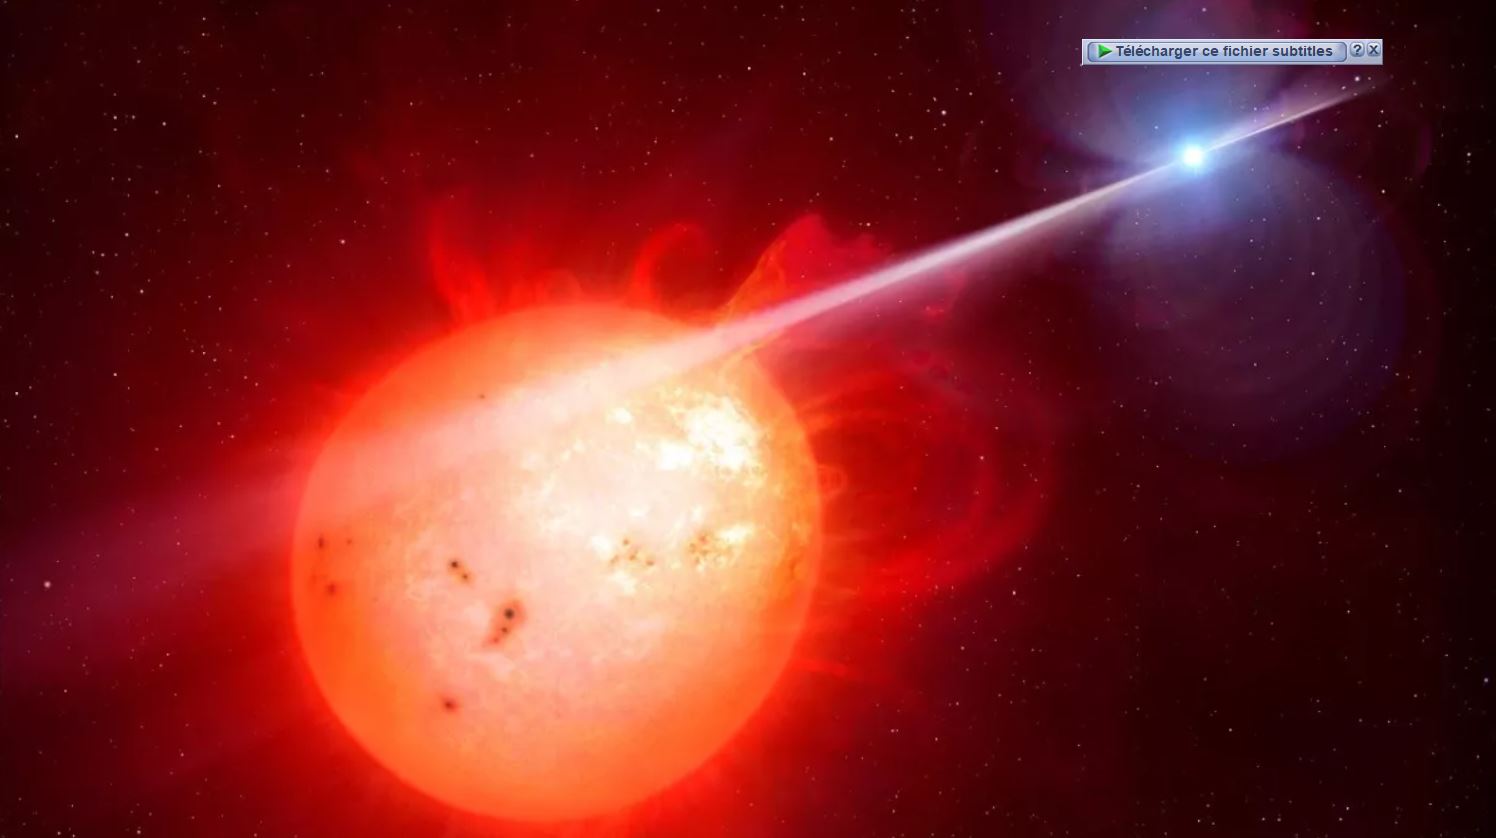 Illuminating Insights into Stellar Evolution Unveiled by the Discovery of Second Fast-Spinning White Dwarf Pulsar